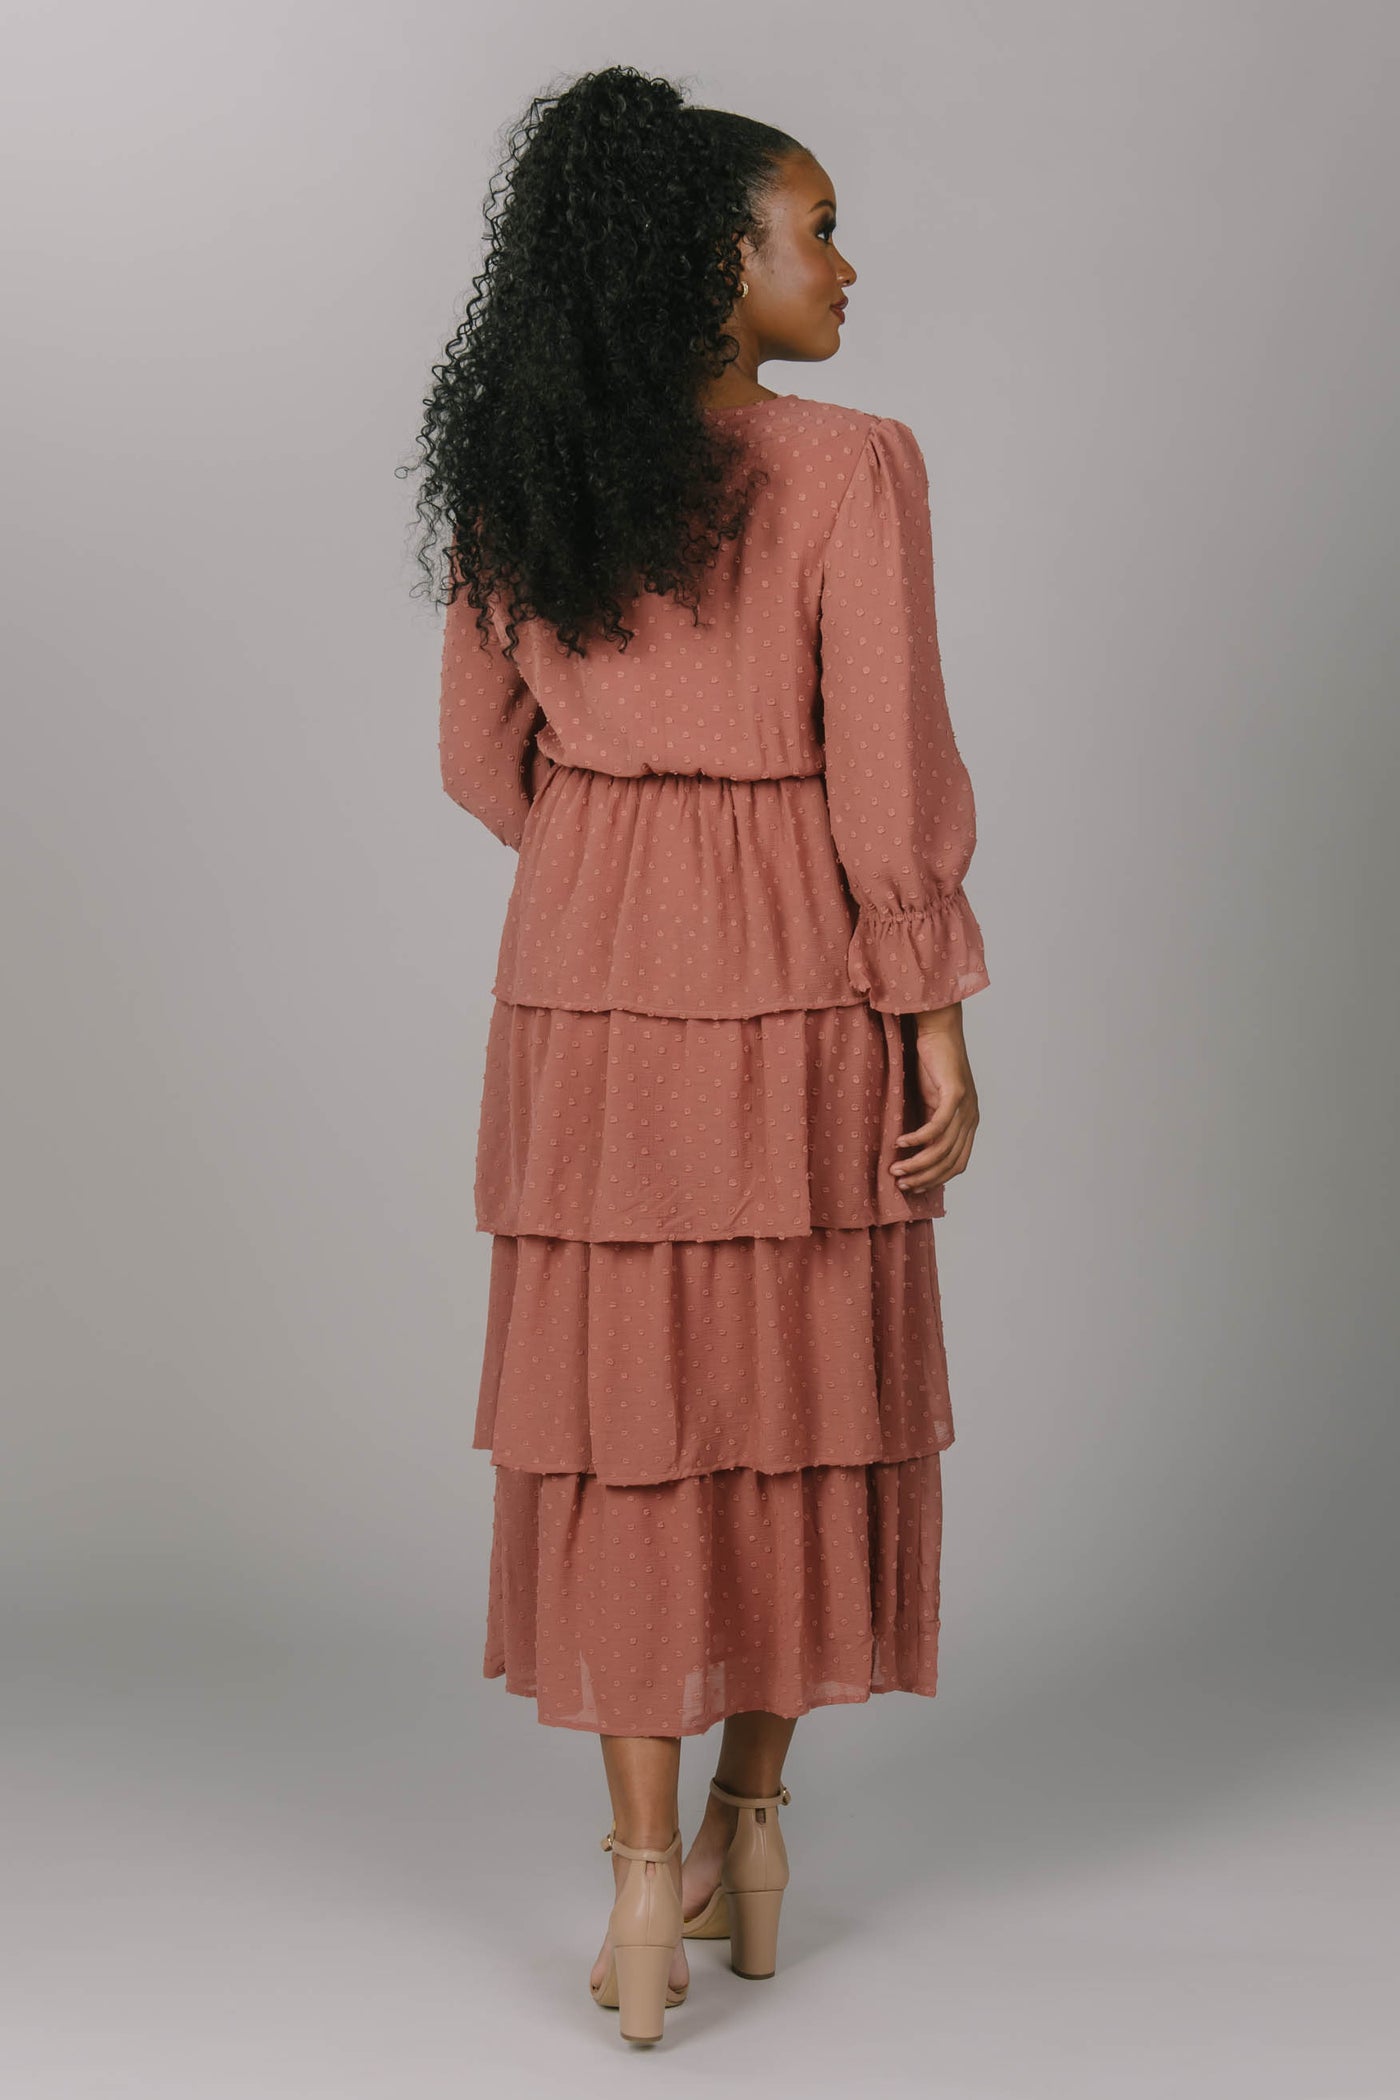 Back view of mauve modest bridesmaid dress. The skirt is tiered and the sleeves are tucked to create a bishop sleeves. It is covered with swiss dots.